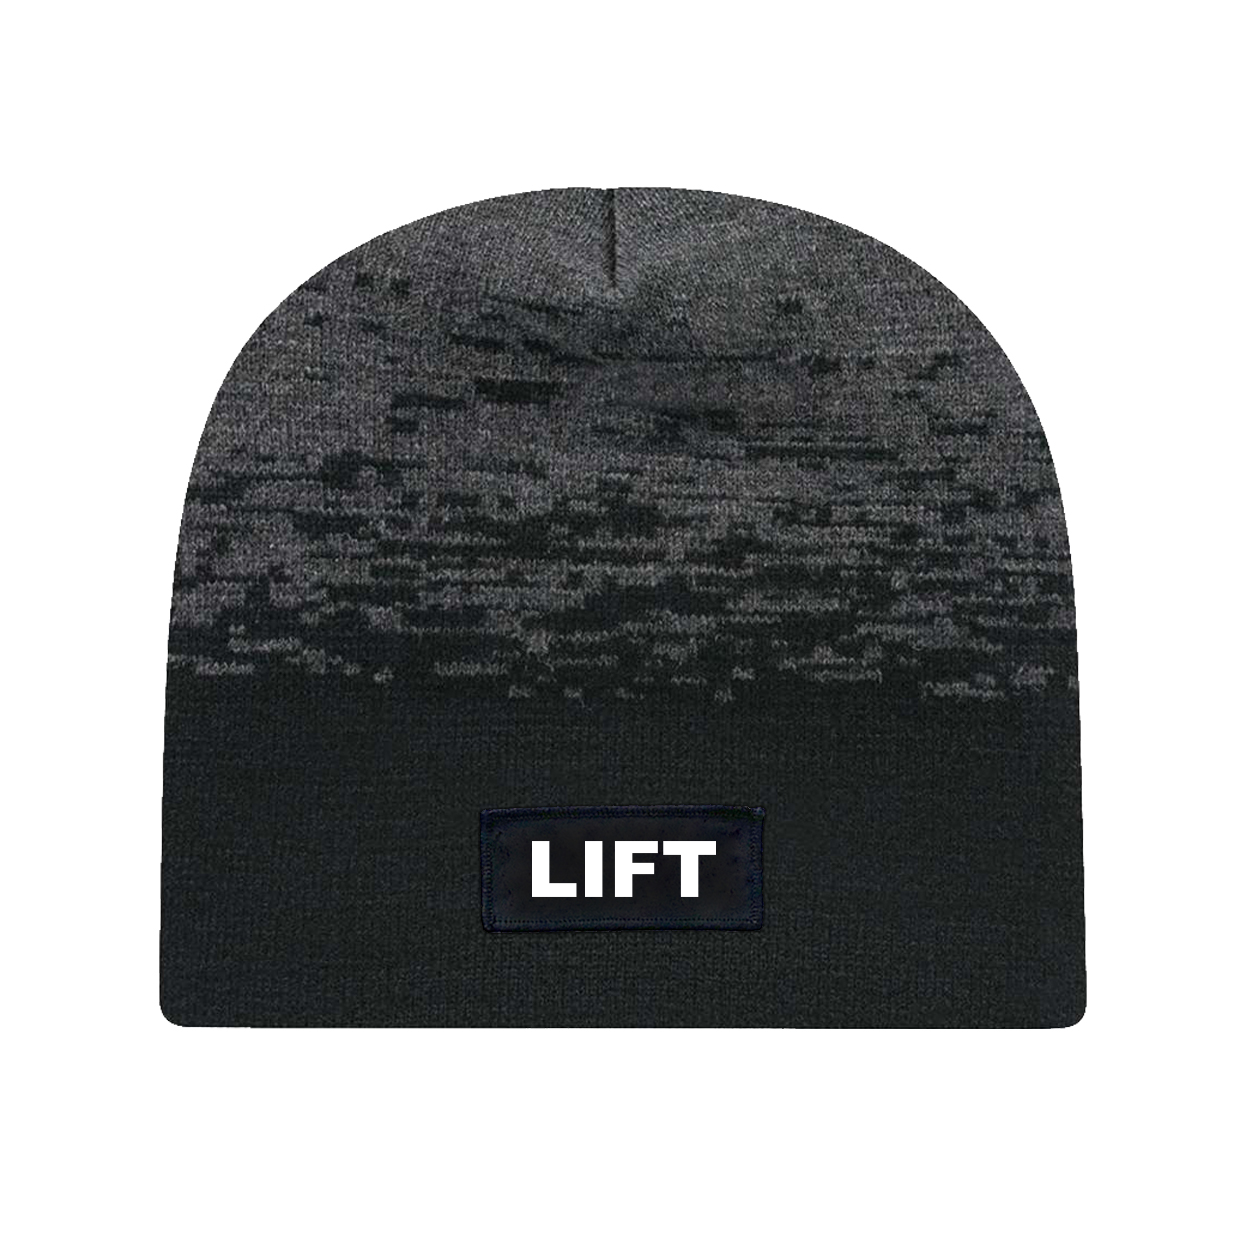 Lift Brand Logo Night Out Woven Patch Marled Knit Skully Beanie Black/ Dark Heather Grey